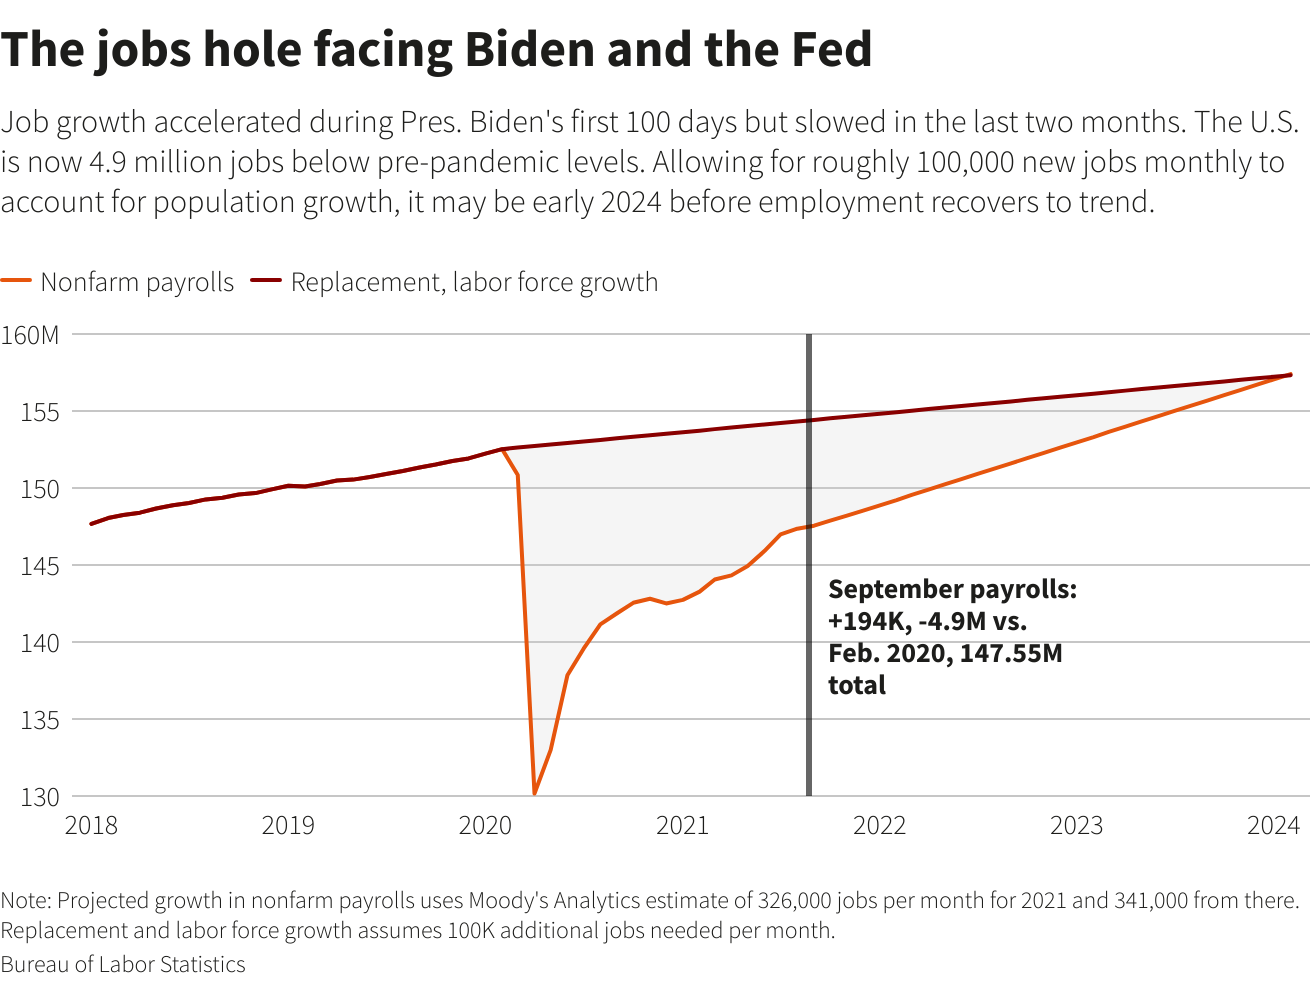 The jobs hole facing Biden and the Fed The jobs hole facing Biden and the Fed